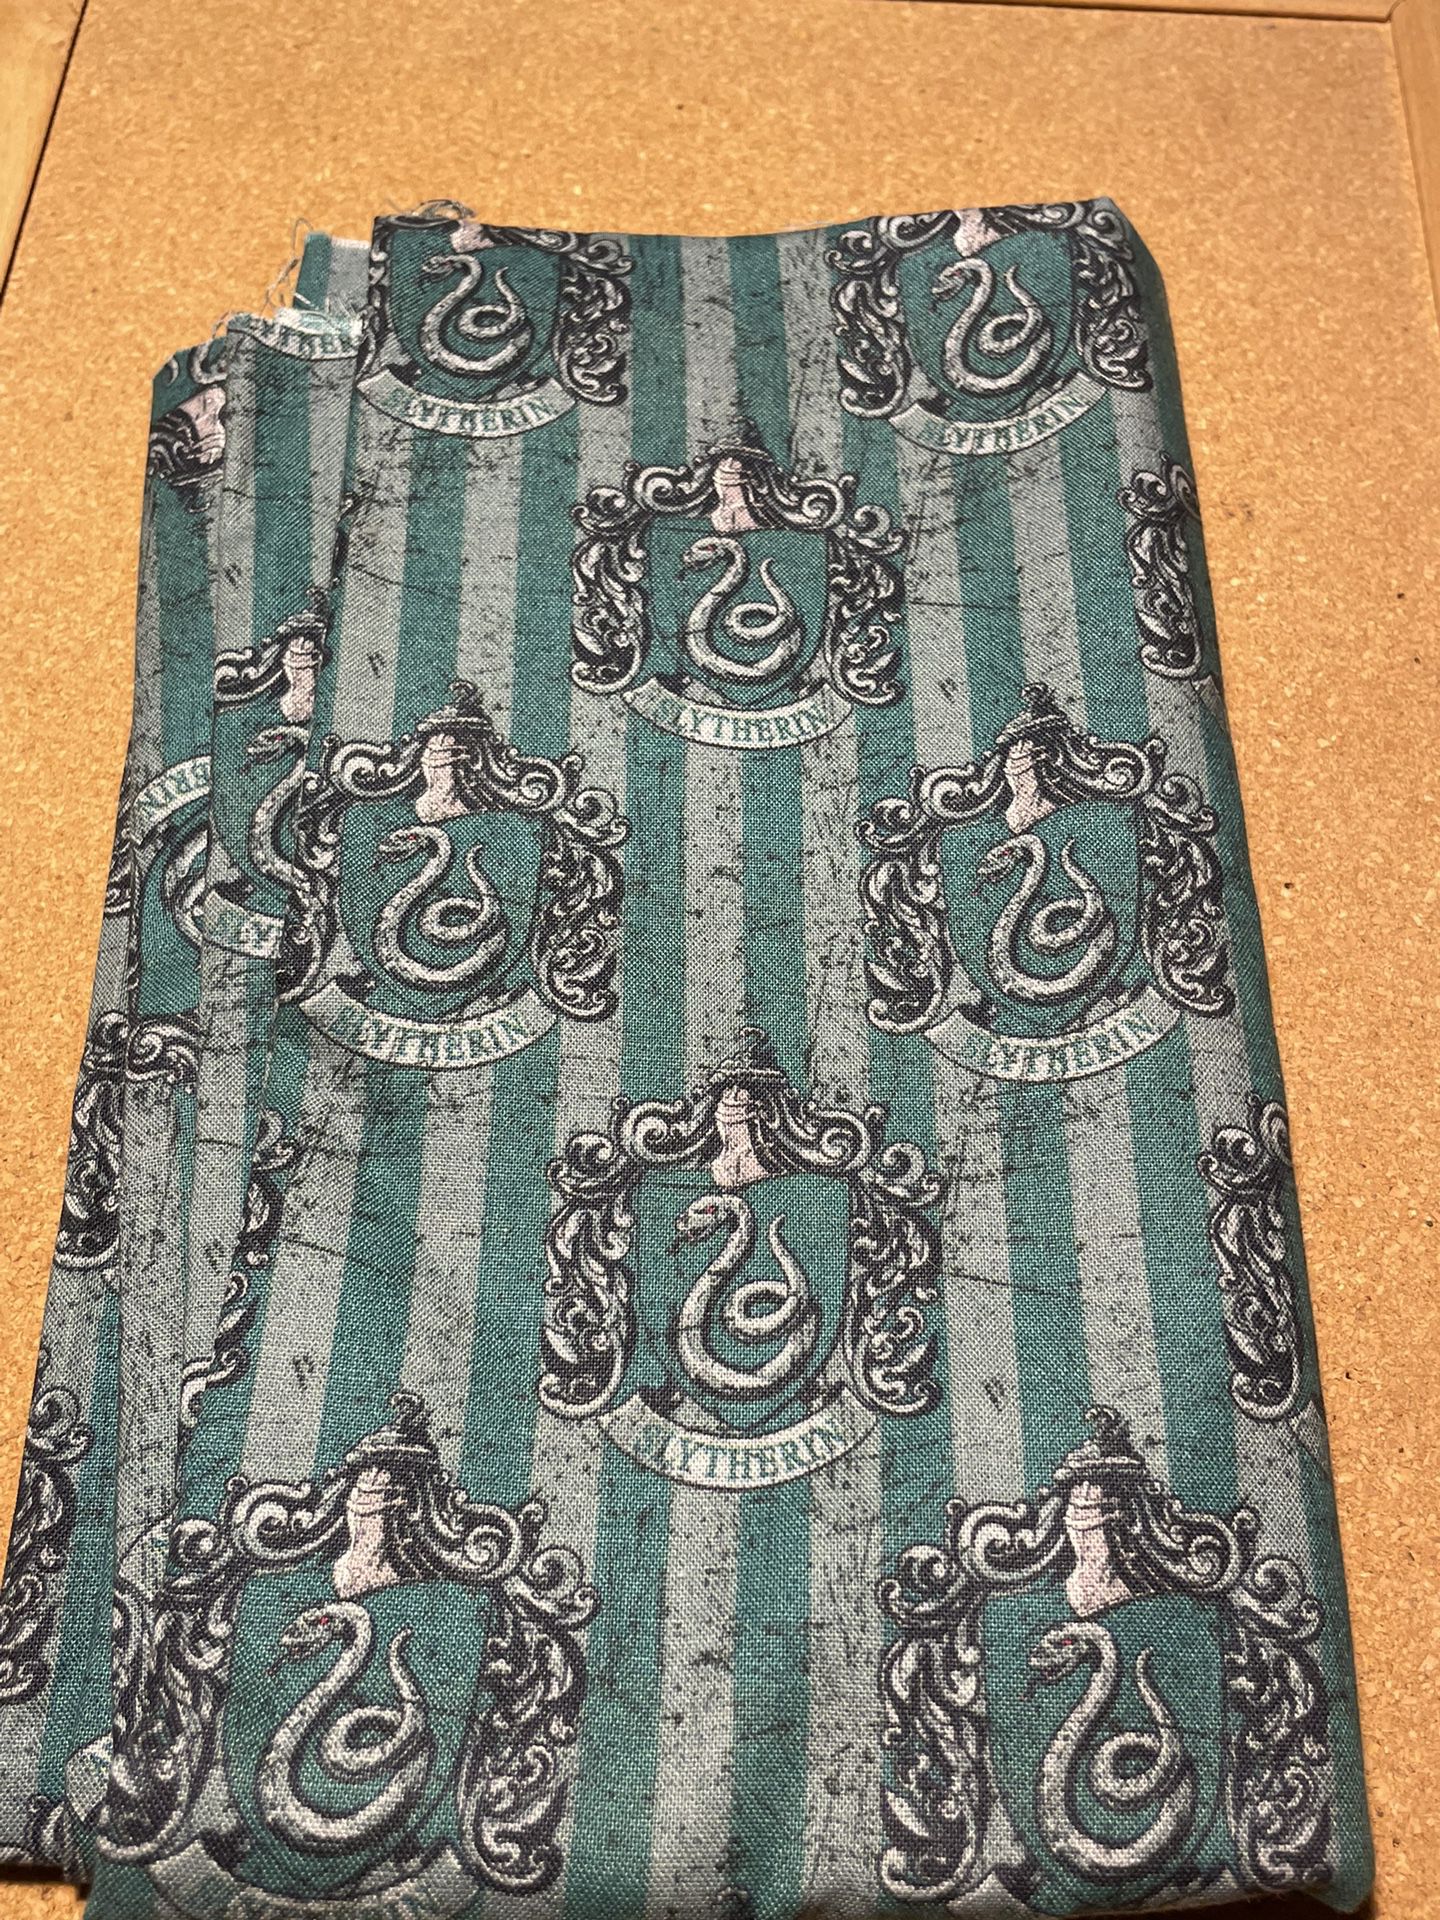 Slytherin Fabric 36in x 43in